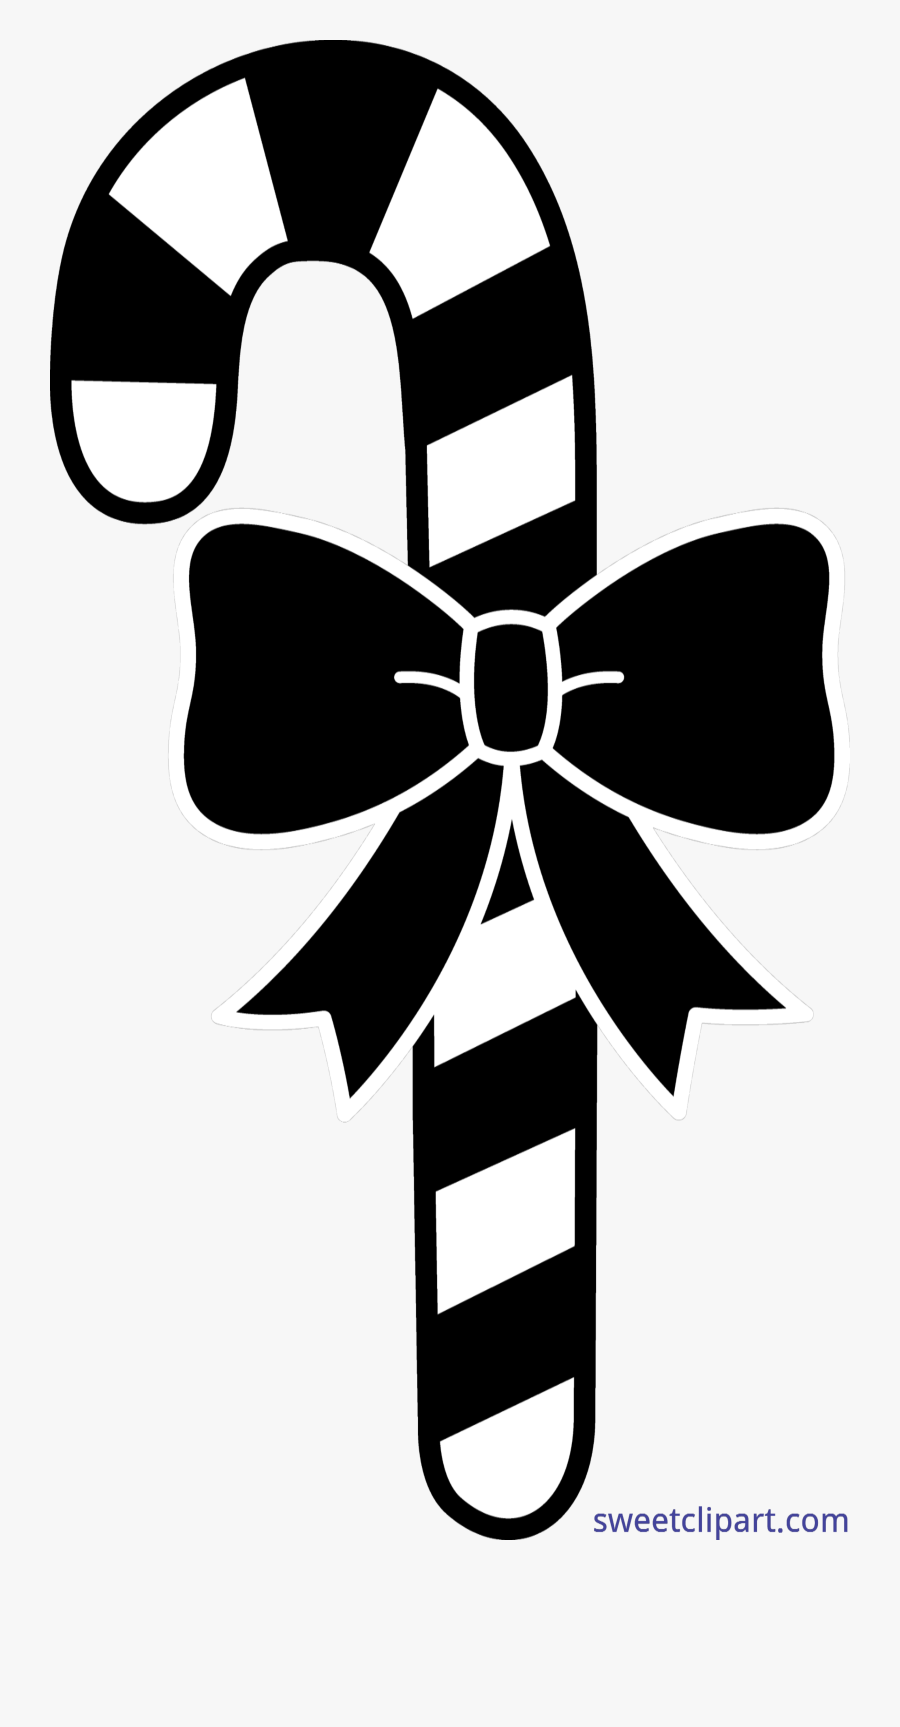 Cane Cilpart Cool Black - Bow Clipart Black And White, Transparent Clipart